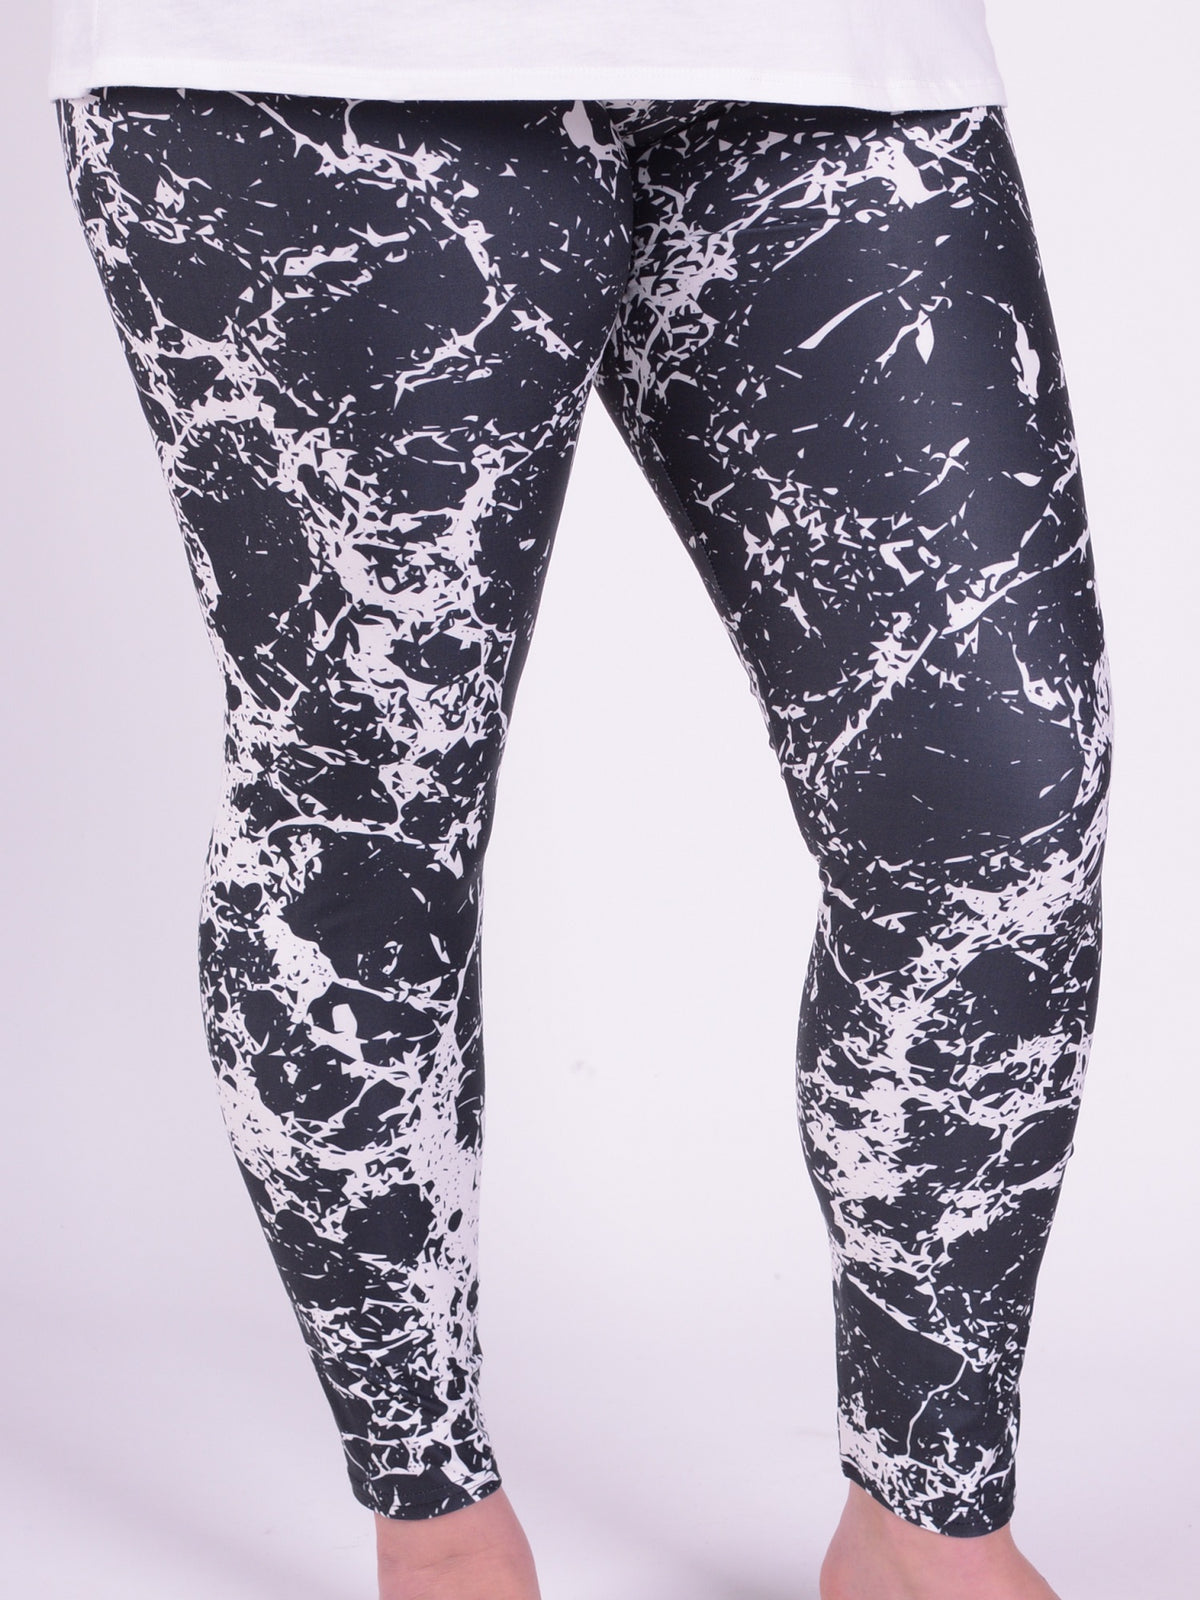 Leggings - Marble - L22, Trousers, Pure Plus Clothing, Lagenlook Clothing, Plus Size Fashion, Over 50 Fashion